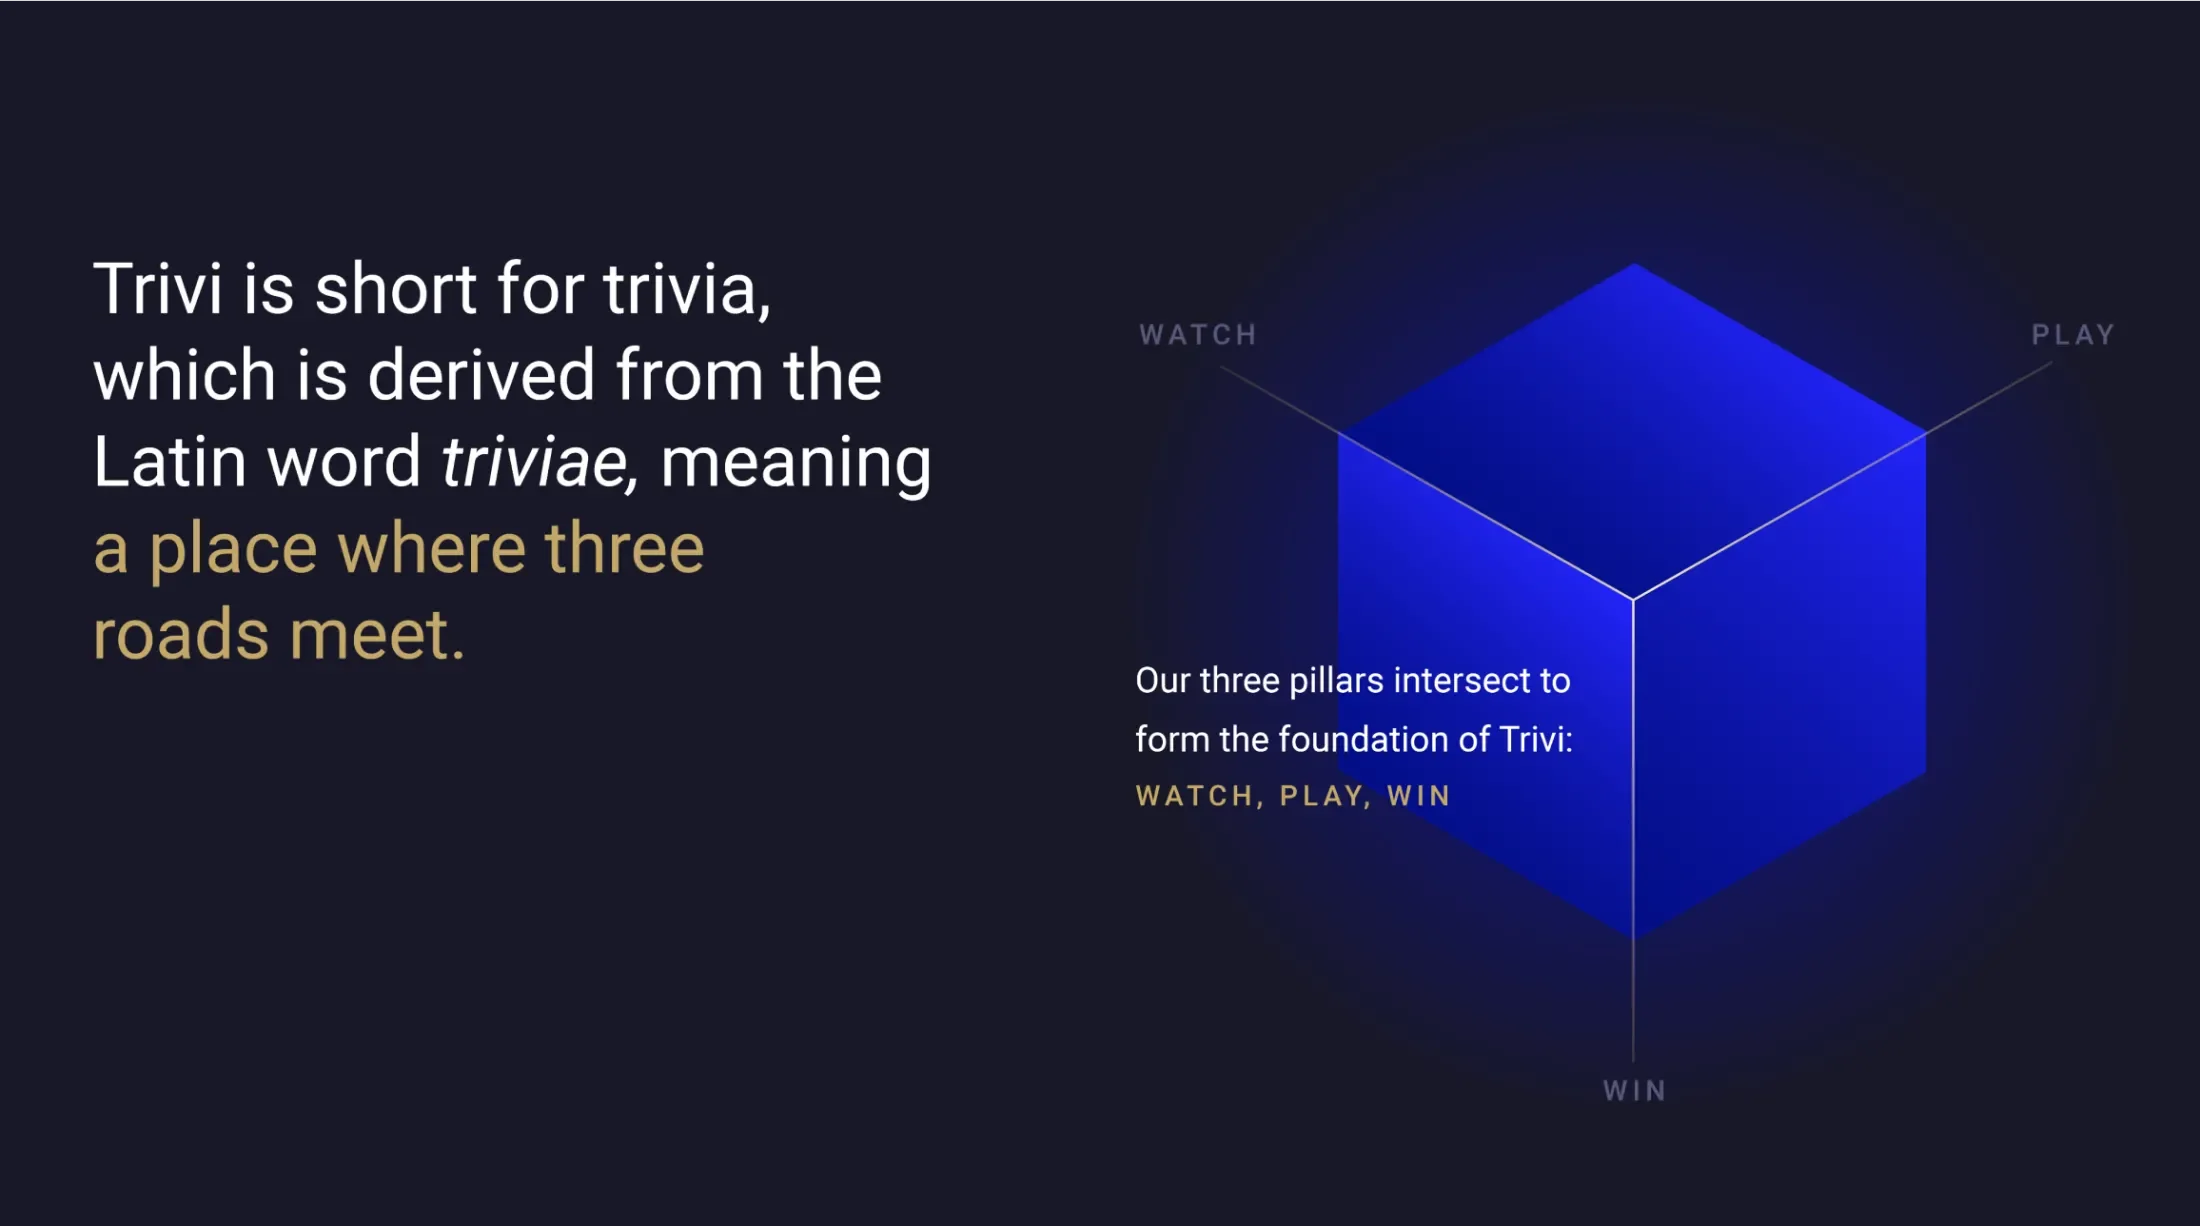 diagram with a blue cube and text which reads, "Trivi is short for trivia, which is derived from the Latin word triviae, meaning a place which three roads meet. Our three pillars intersect to form the foundation of Trivi: Watch, Play, Win